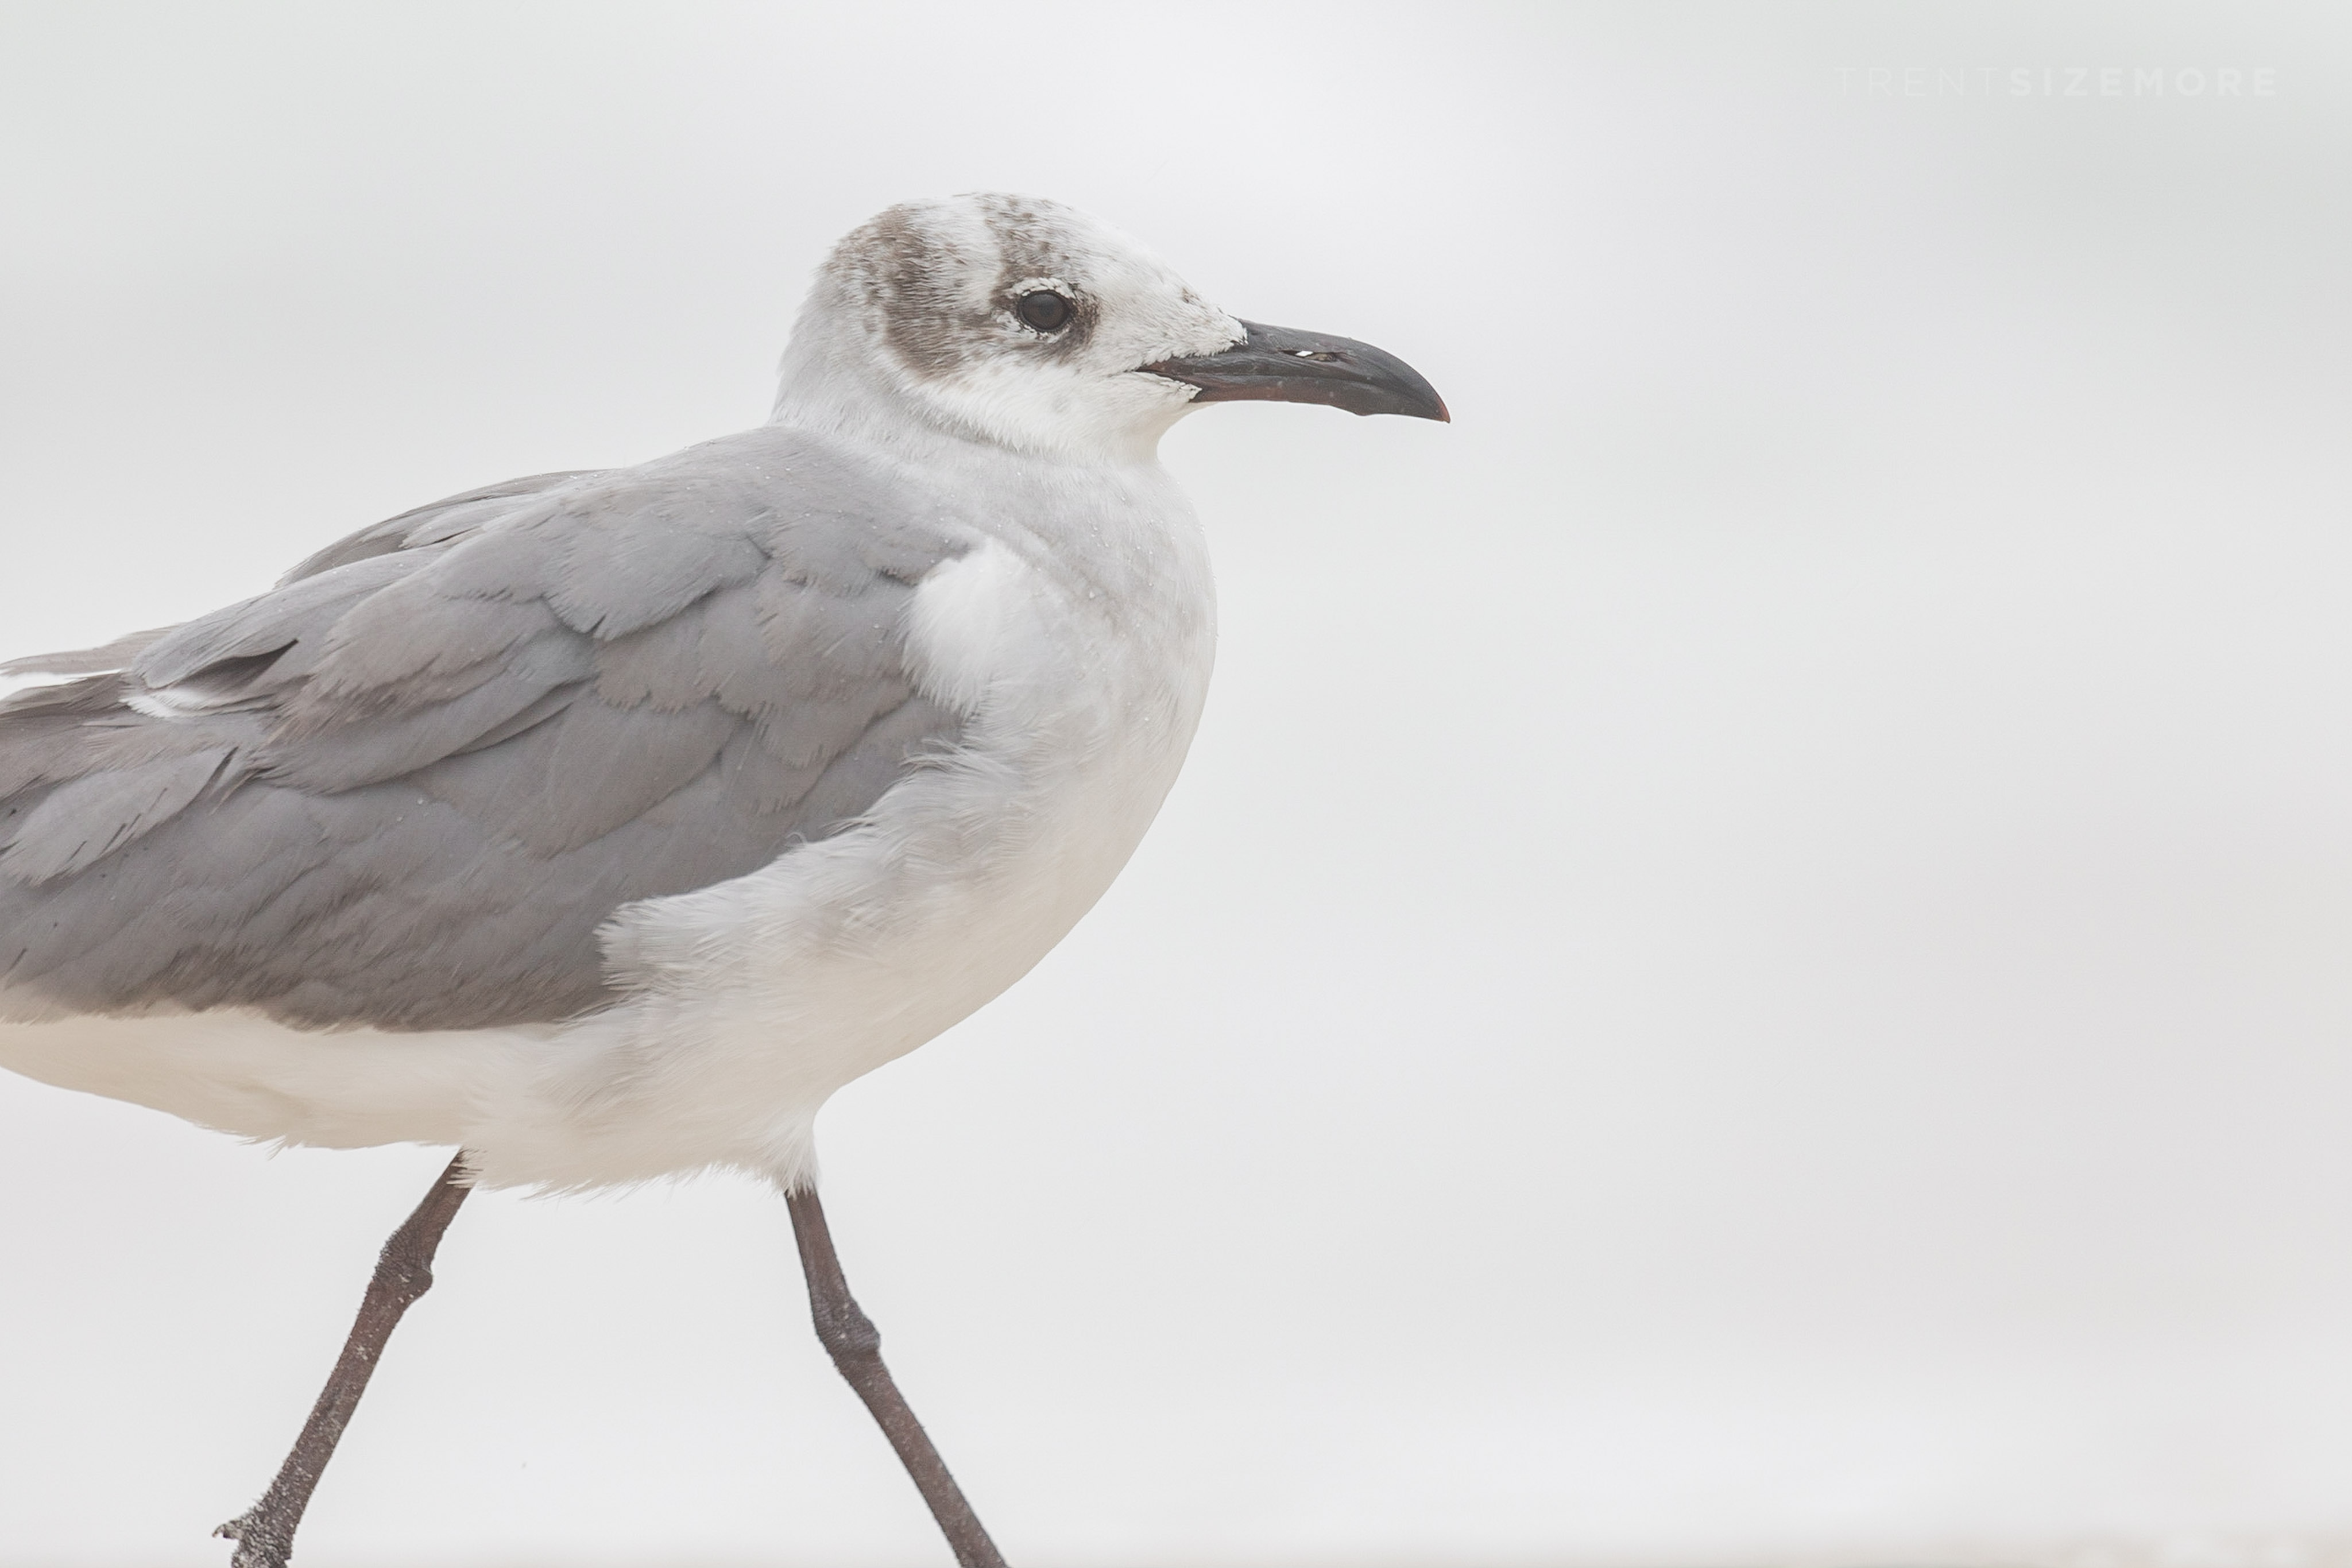 5 Simple Tips to Improve Your Bird Photography